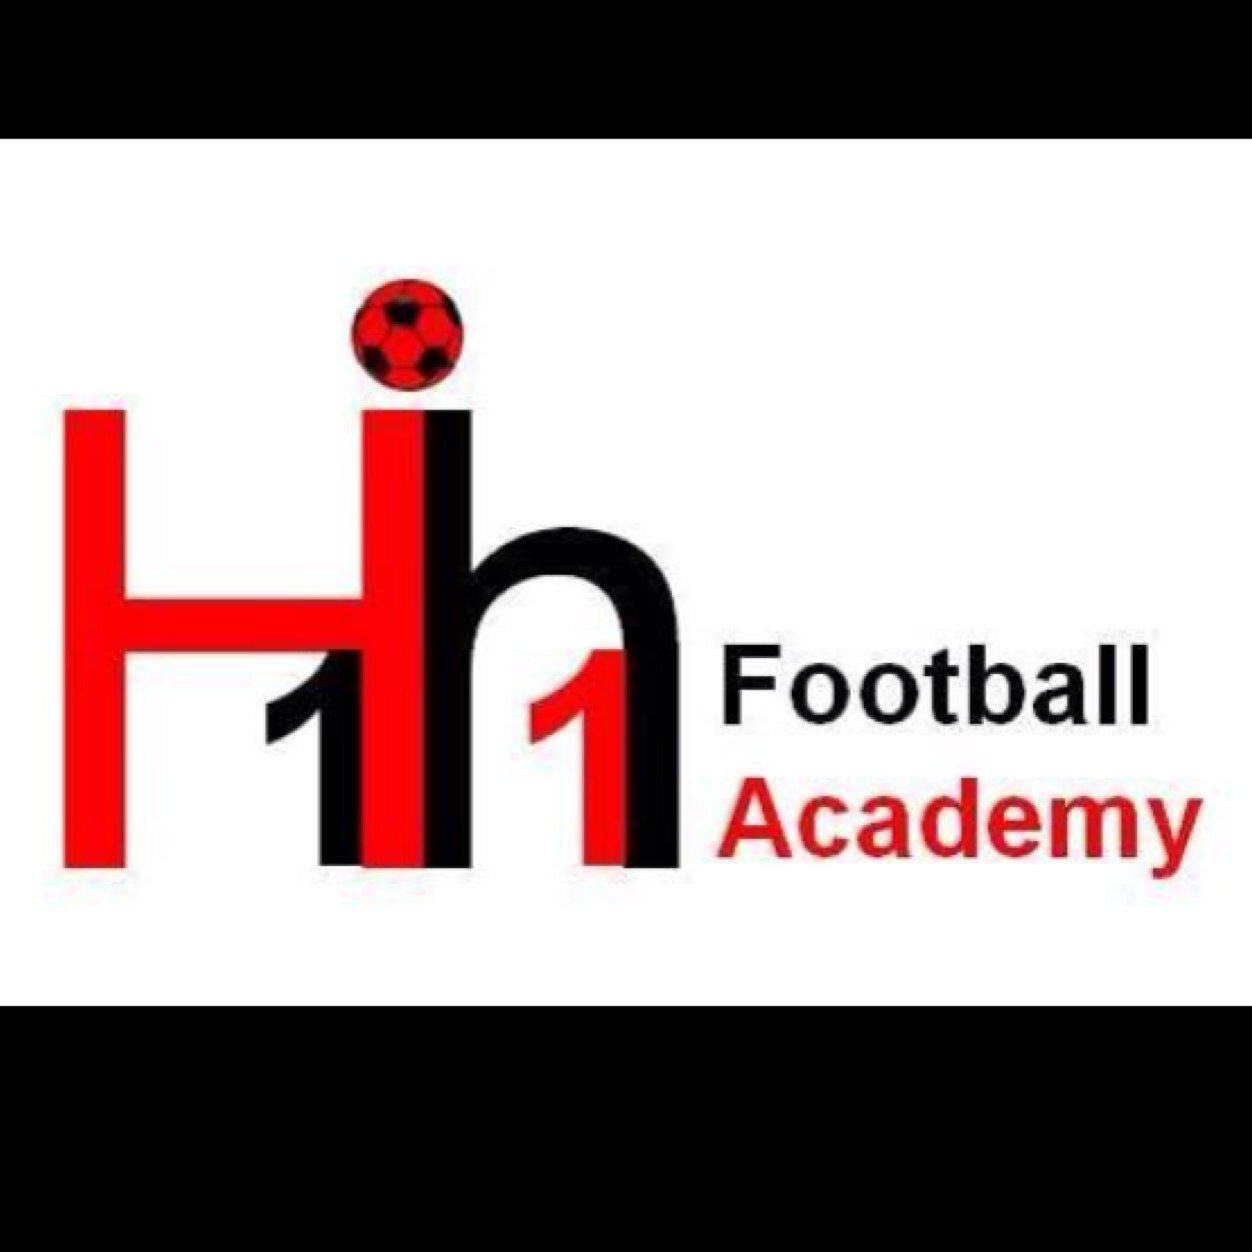 HH11 Football academy is Based in Borehamwood, For young aspiring footballers aged 5-16.